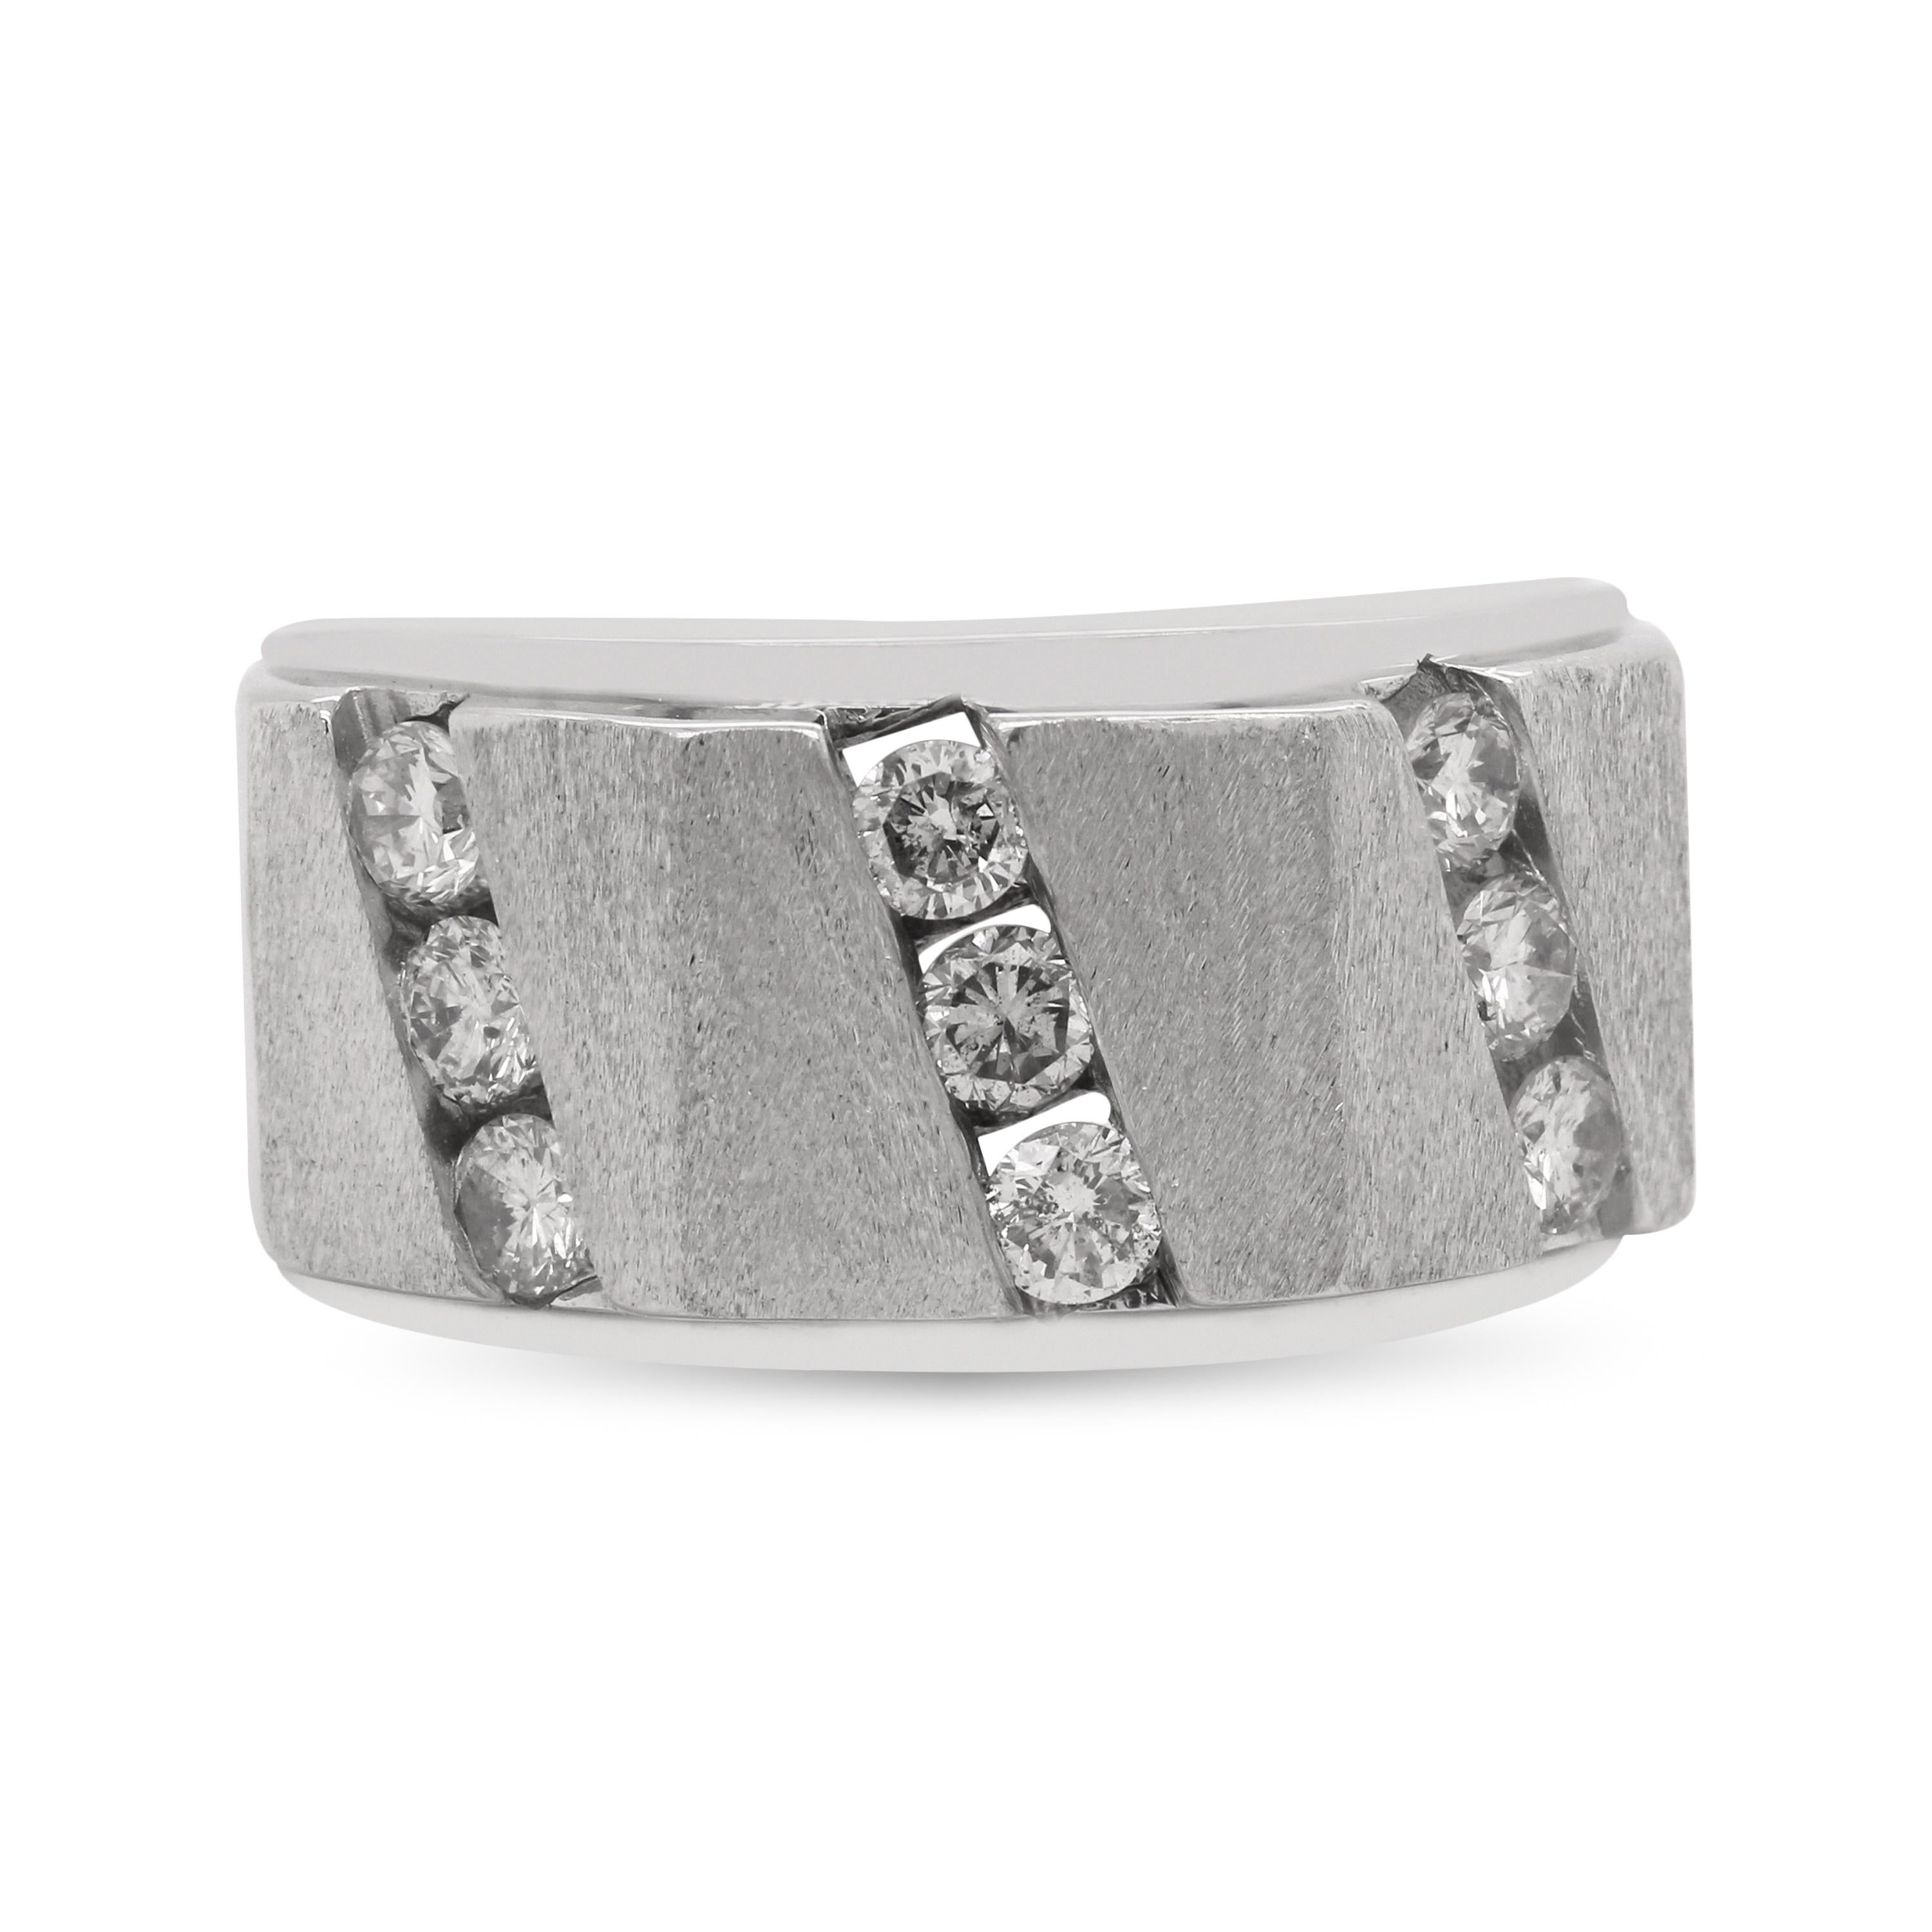 14K White Gold Matte Finish and Diamond Mens Ring

This simple, yet elegant mens ring features three rows of diamonds with a matte, brushed finishing along with high-polished shiny finishing on the edges.

Apprx. 1 carat diamonds total weight

Ring